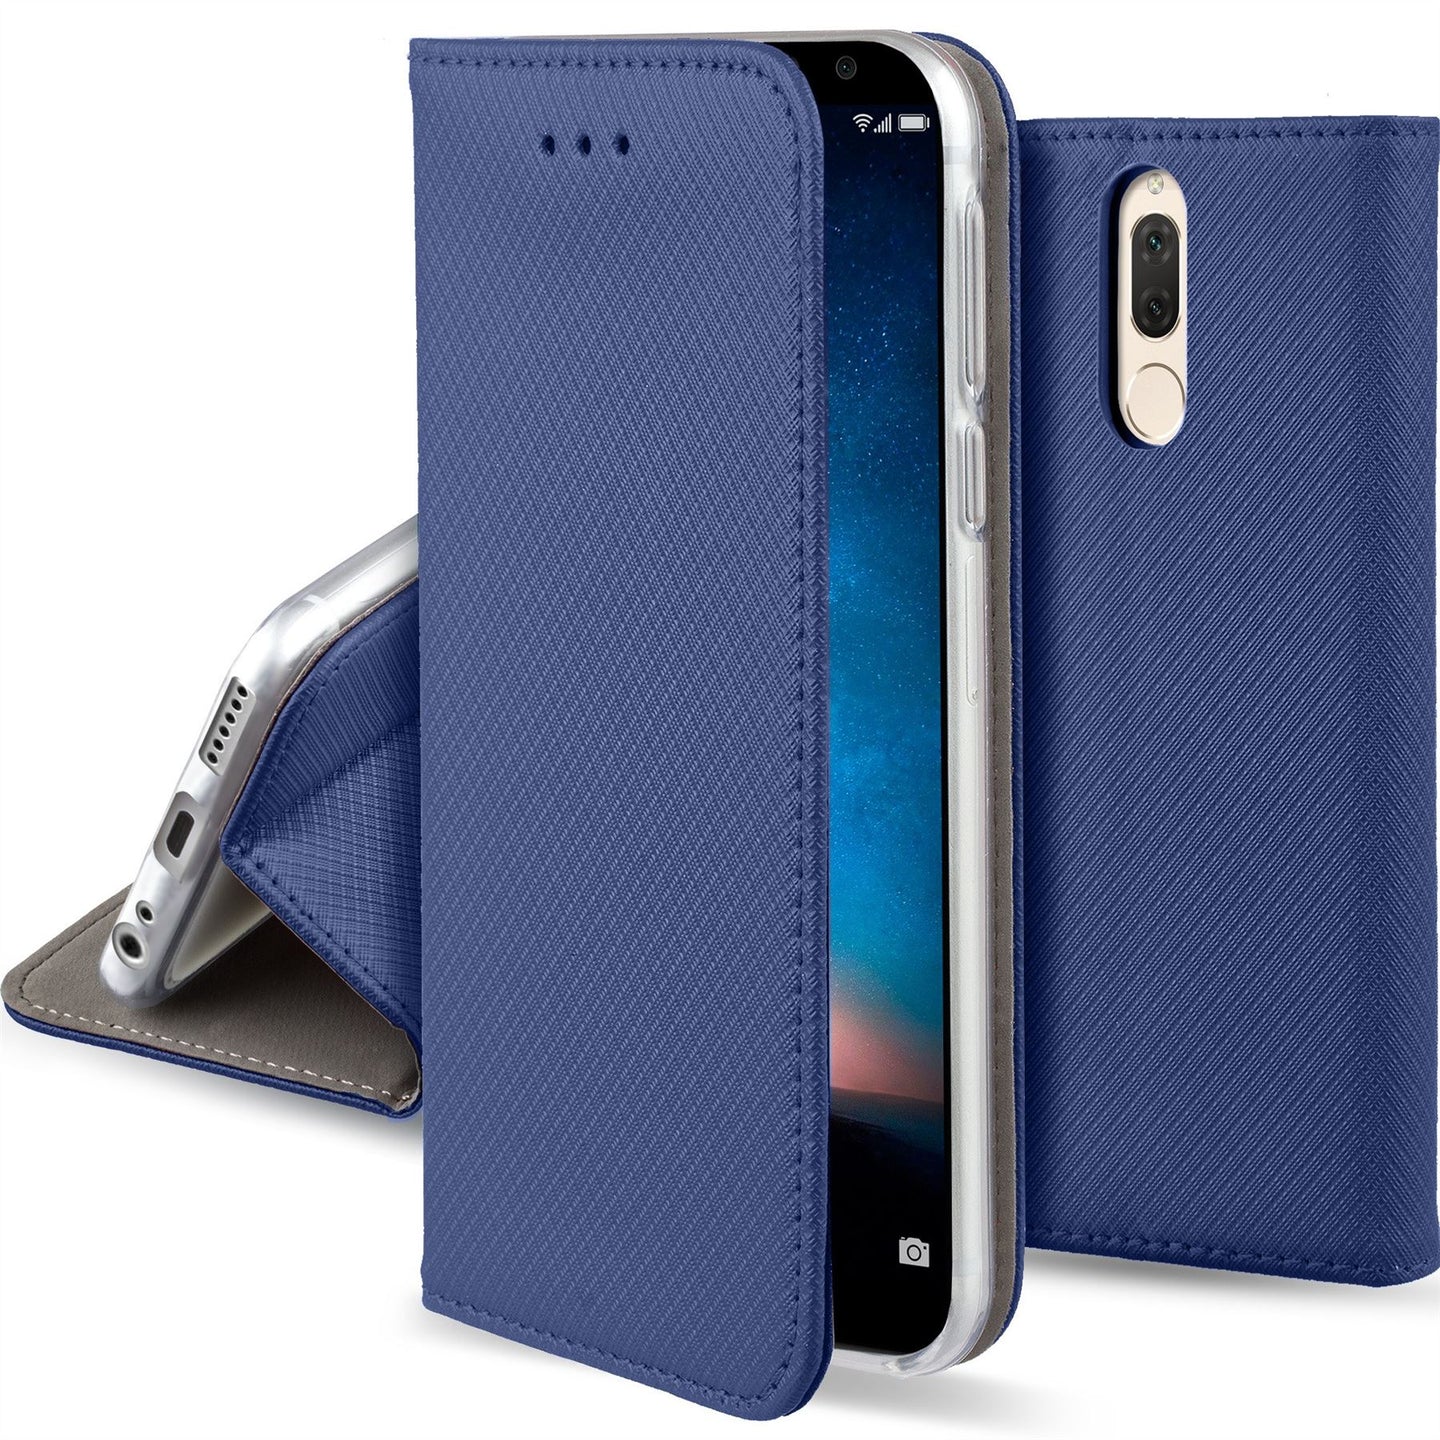 Moozy Case Flip Cover for Huawei Mate 10 Lite, Dark Blue - Smart Magnetic Flip Case with Card Holder and Stand